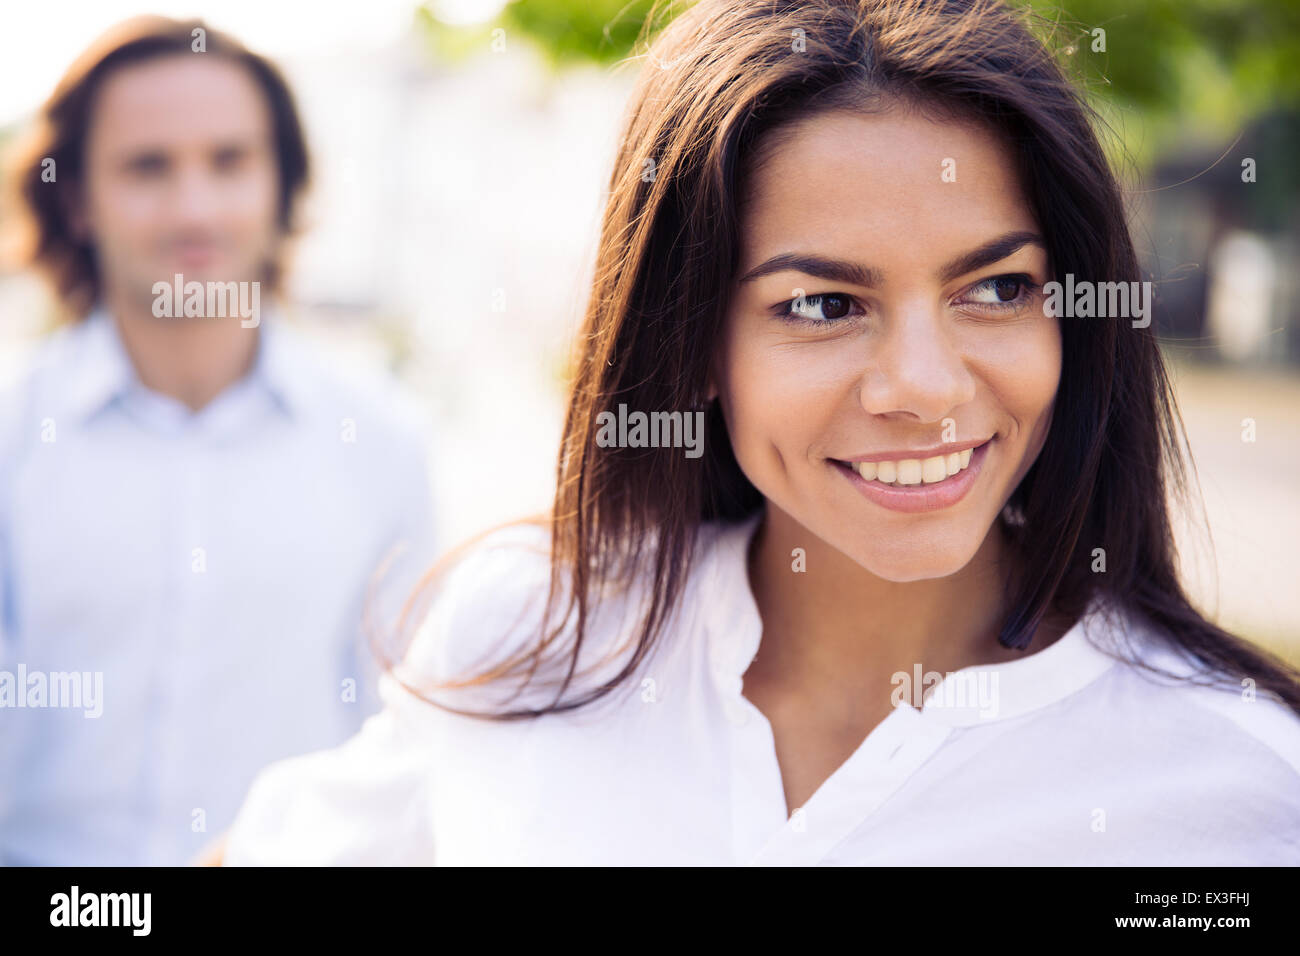 Smiling young woman holding man's hand and leading him outdoors Stock Photo